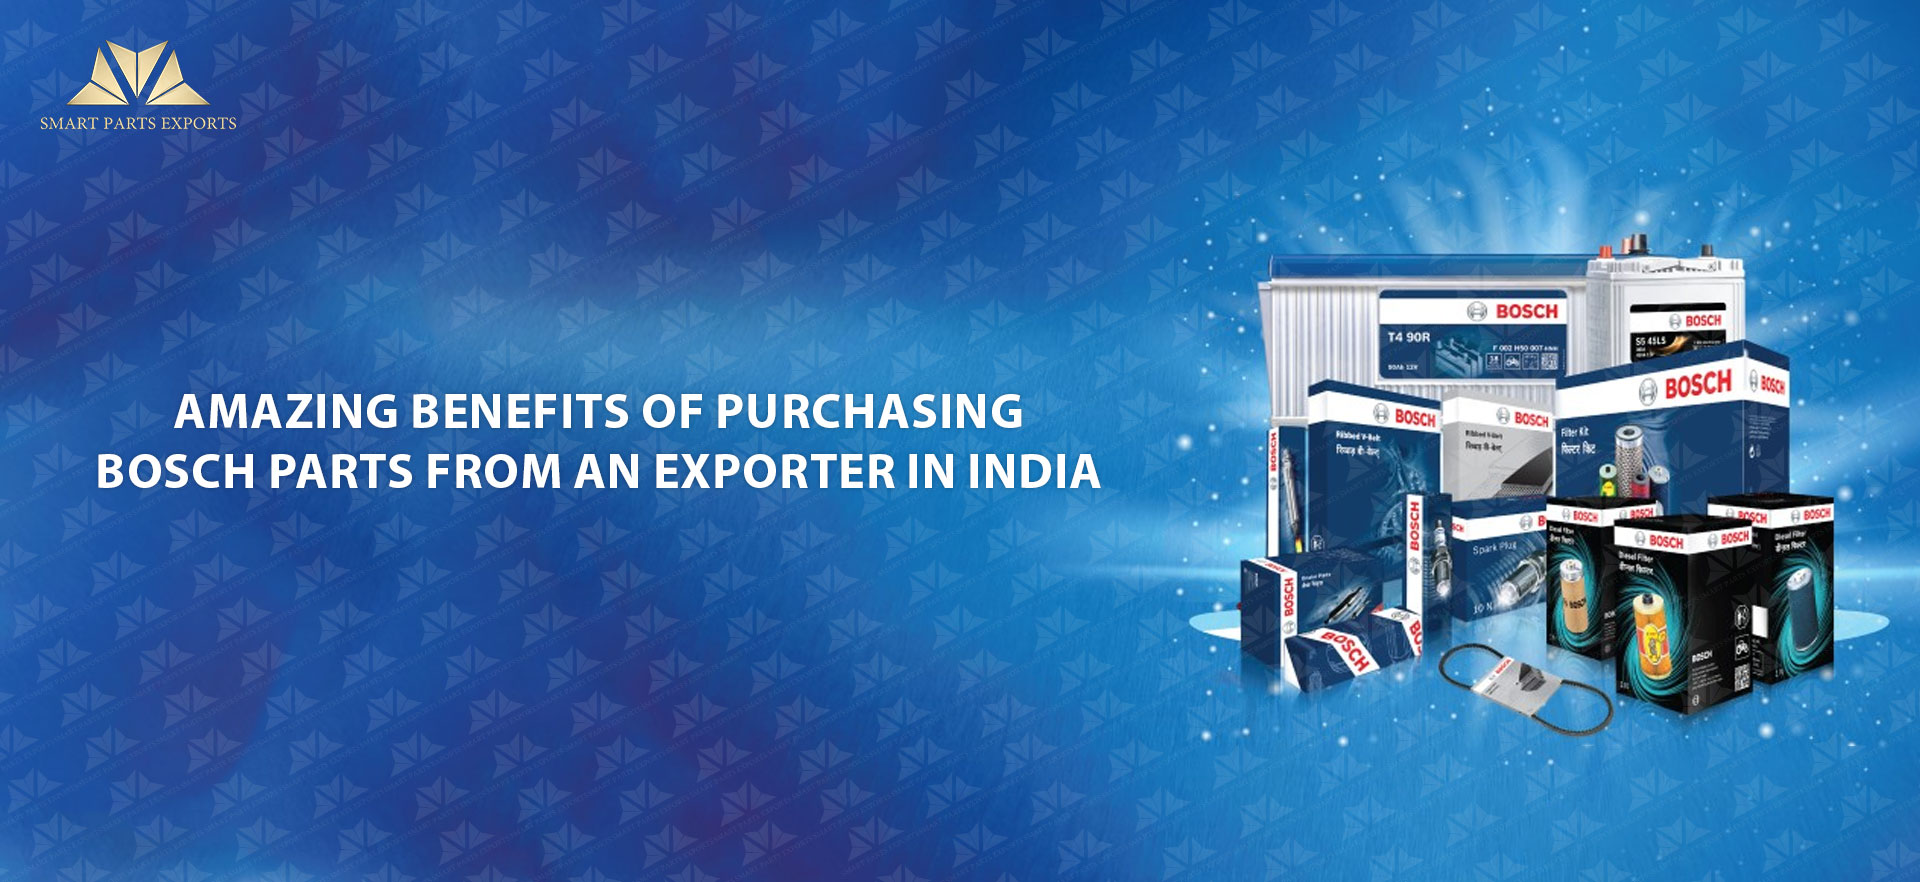 Amazing Benefits of Purchasing Bosch Parts from an Exporter in India